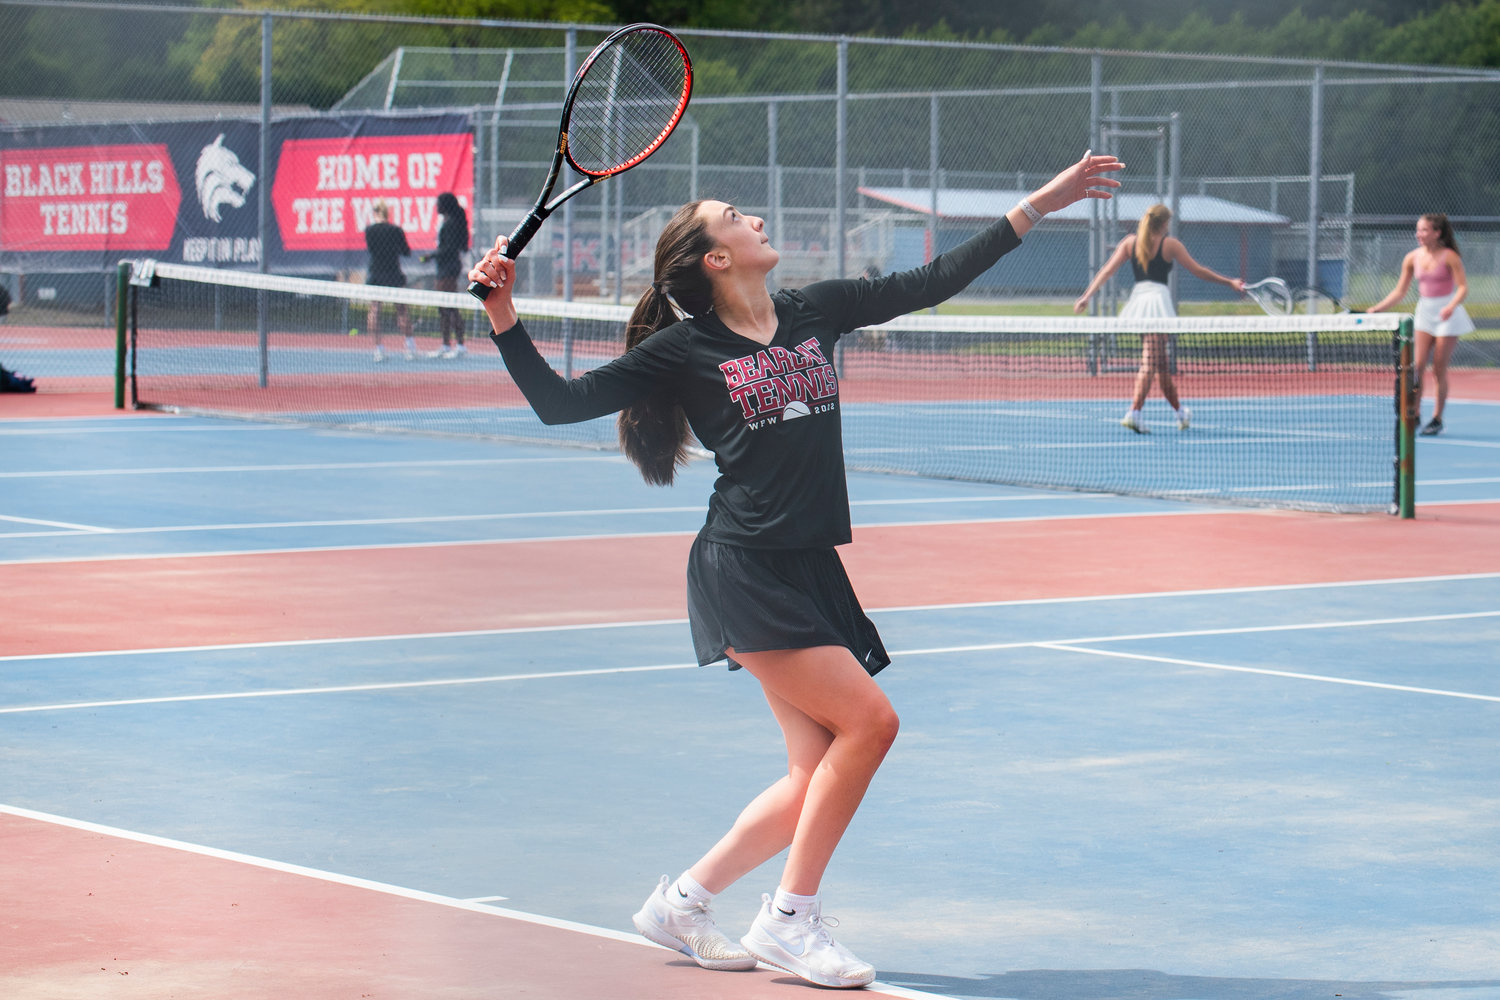 Claire Kuykendall, first singles player for W.F. West, looks up as she prepares to serve during a match at A.G. West Black Hills High School Tuesday afternoon in Tumwater.